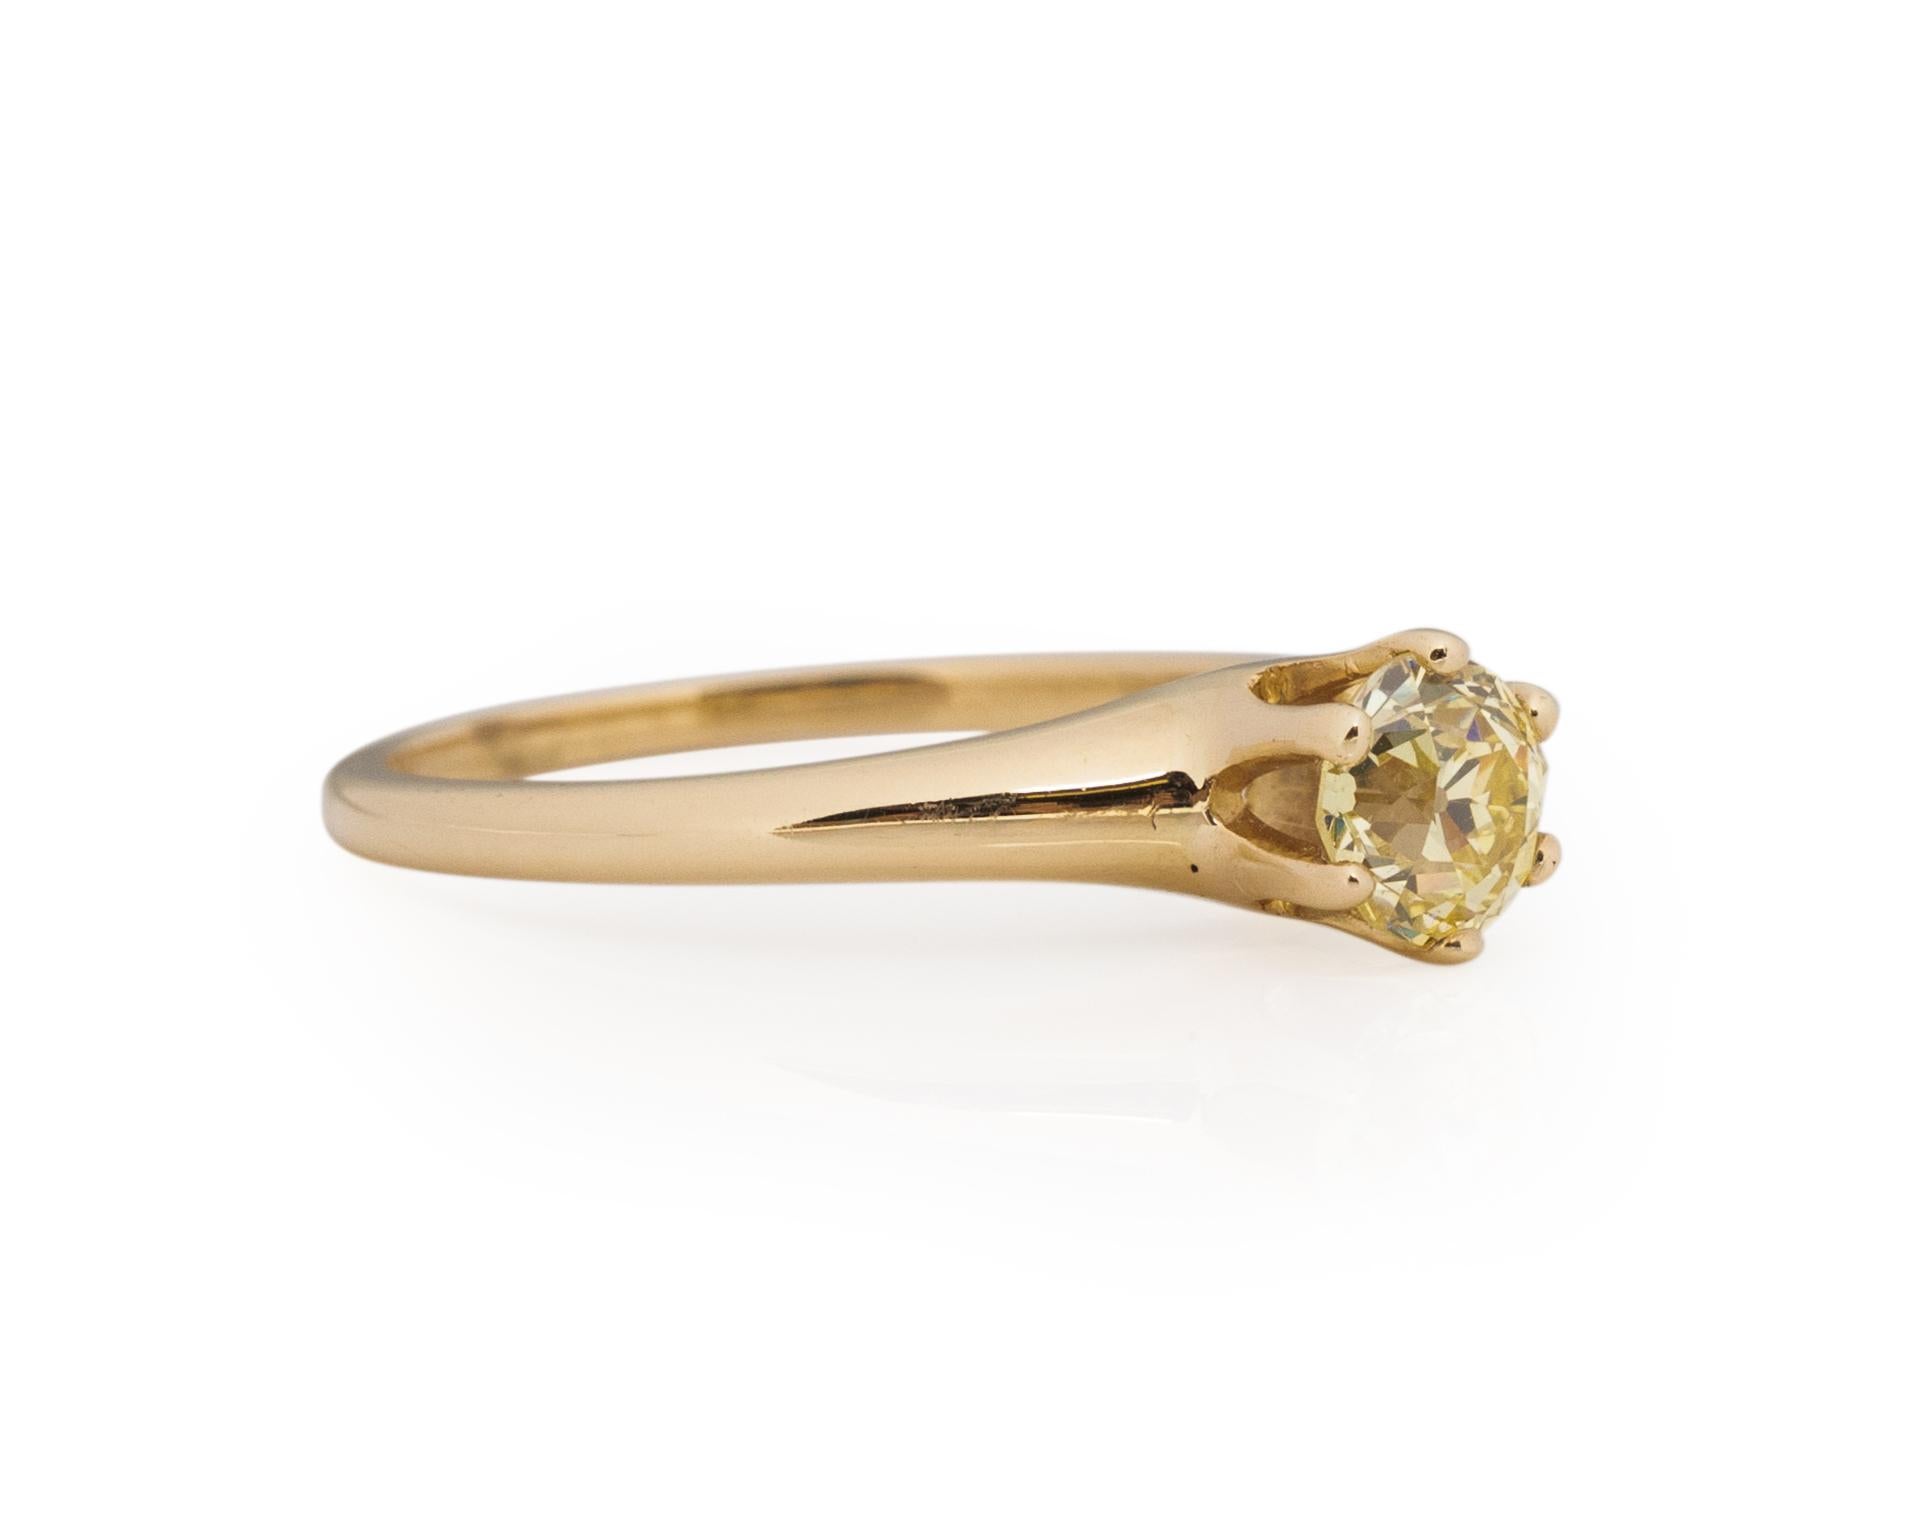 Ring Size: 8.75
Metal Type: 14K Yellow Gold [Hallmarked, and Tested]
Weight: 3.45 grams

Center Diamond Details:
GIA REPORT #: 2221176353
Weight: .88ct
Cut: Old European brilliant
Color: Fancy Yellow, Natural
Clarity: VVS2
Measurements: 6.02mm x